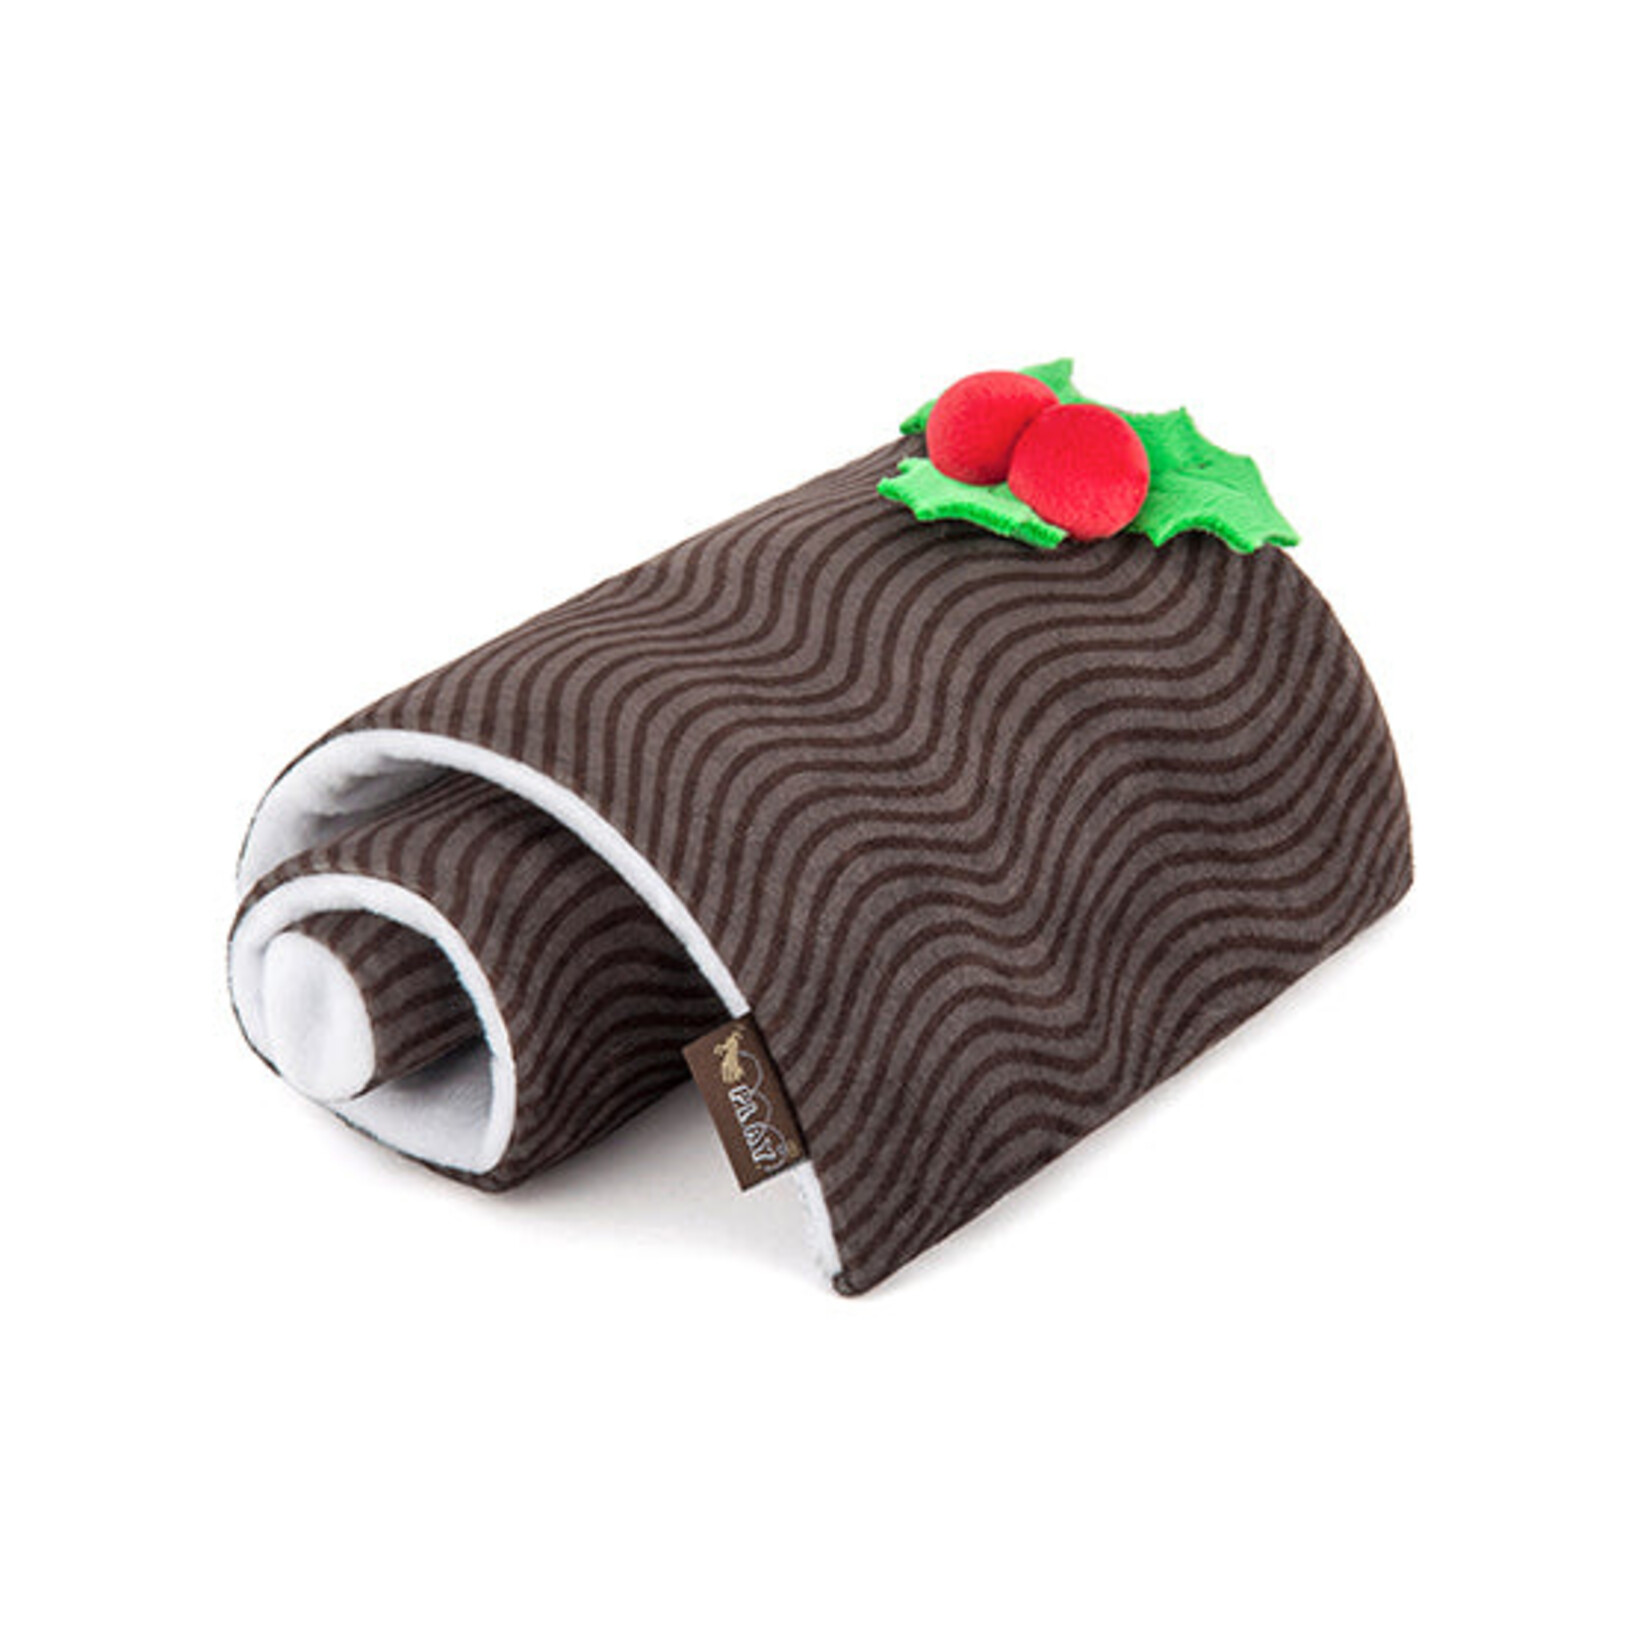 PLAY PLAY - Holiday Classic Collection - Yule Log Plush Toy